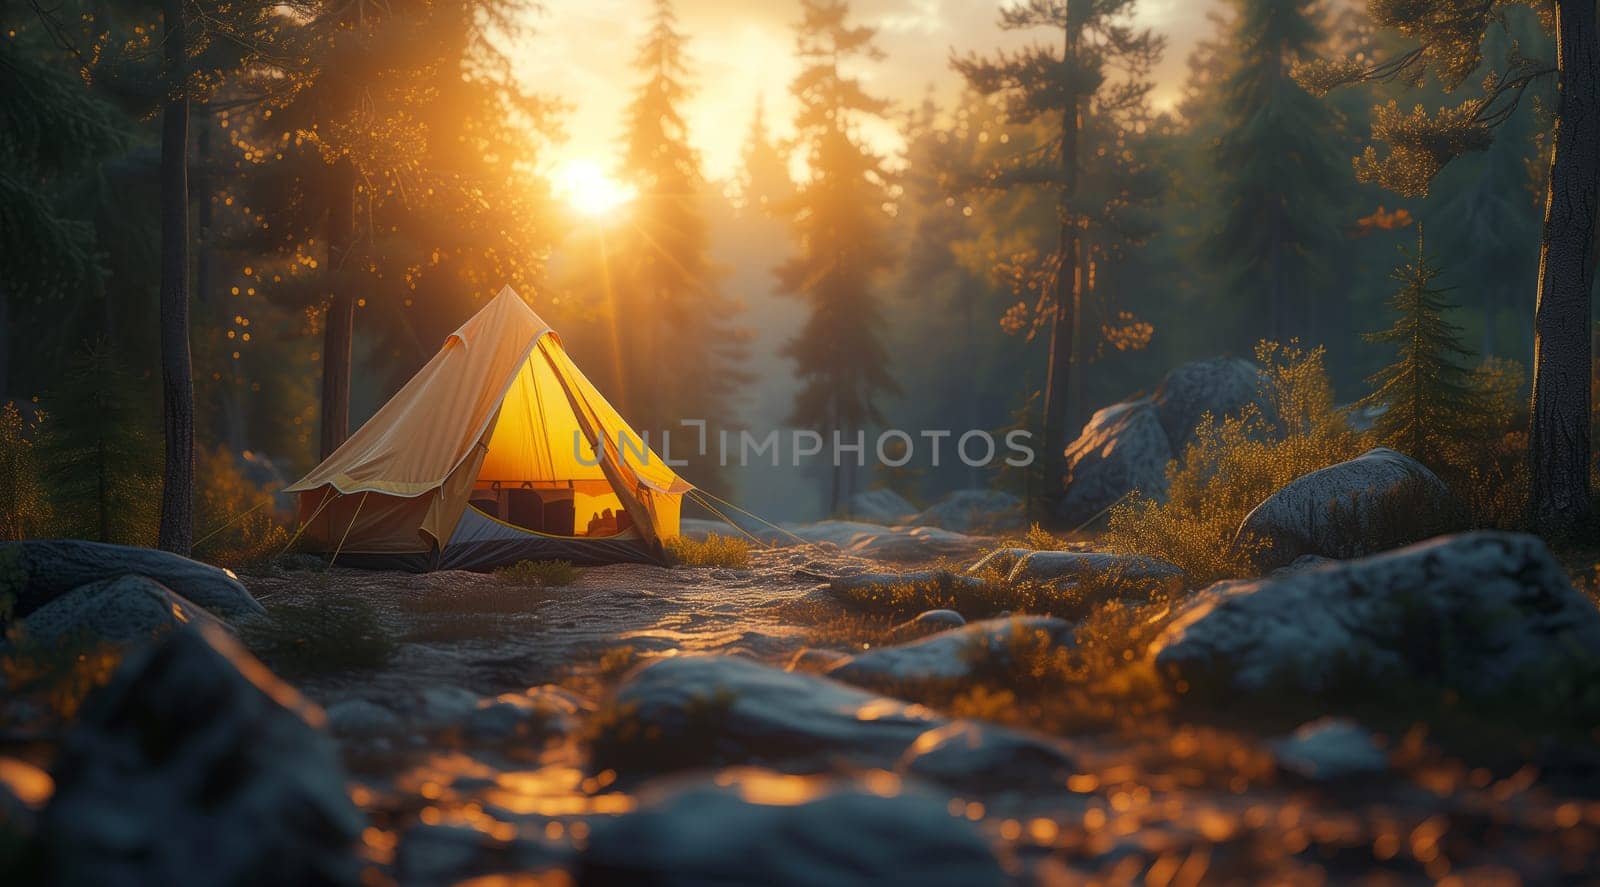 Tent in forest at sunset, surrounded by trees, grass, and warm atmosphere by richwolf